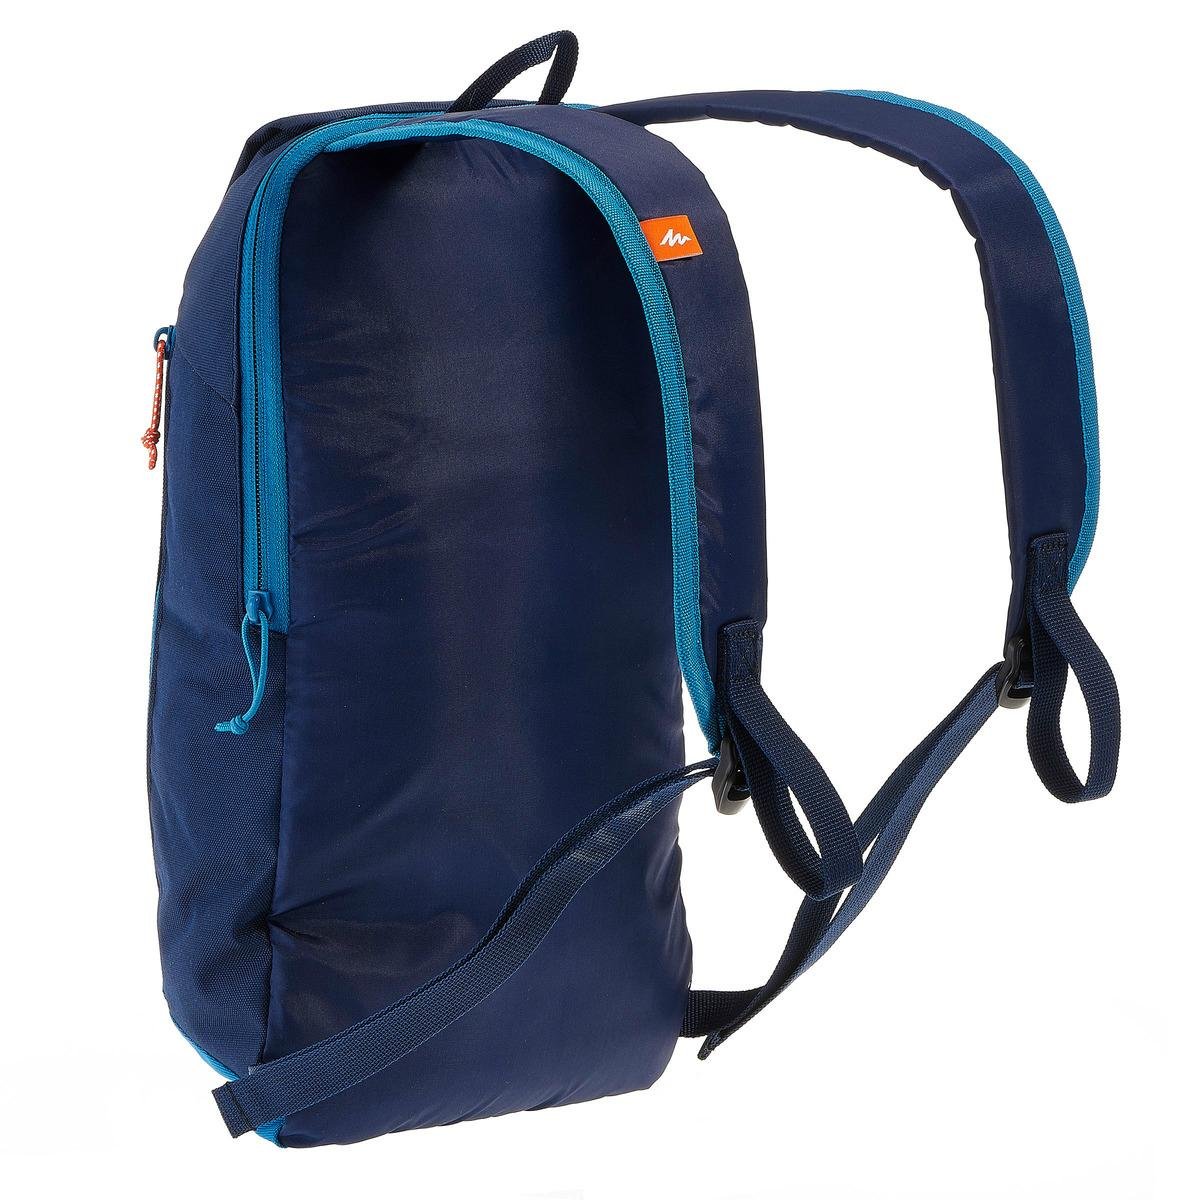 Outdoors sports easy to carry casual 10L backpack 3